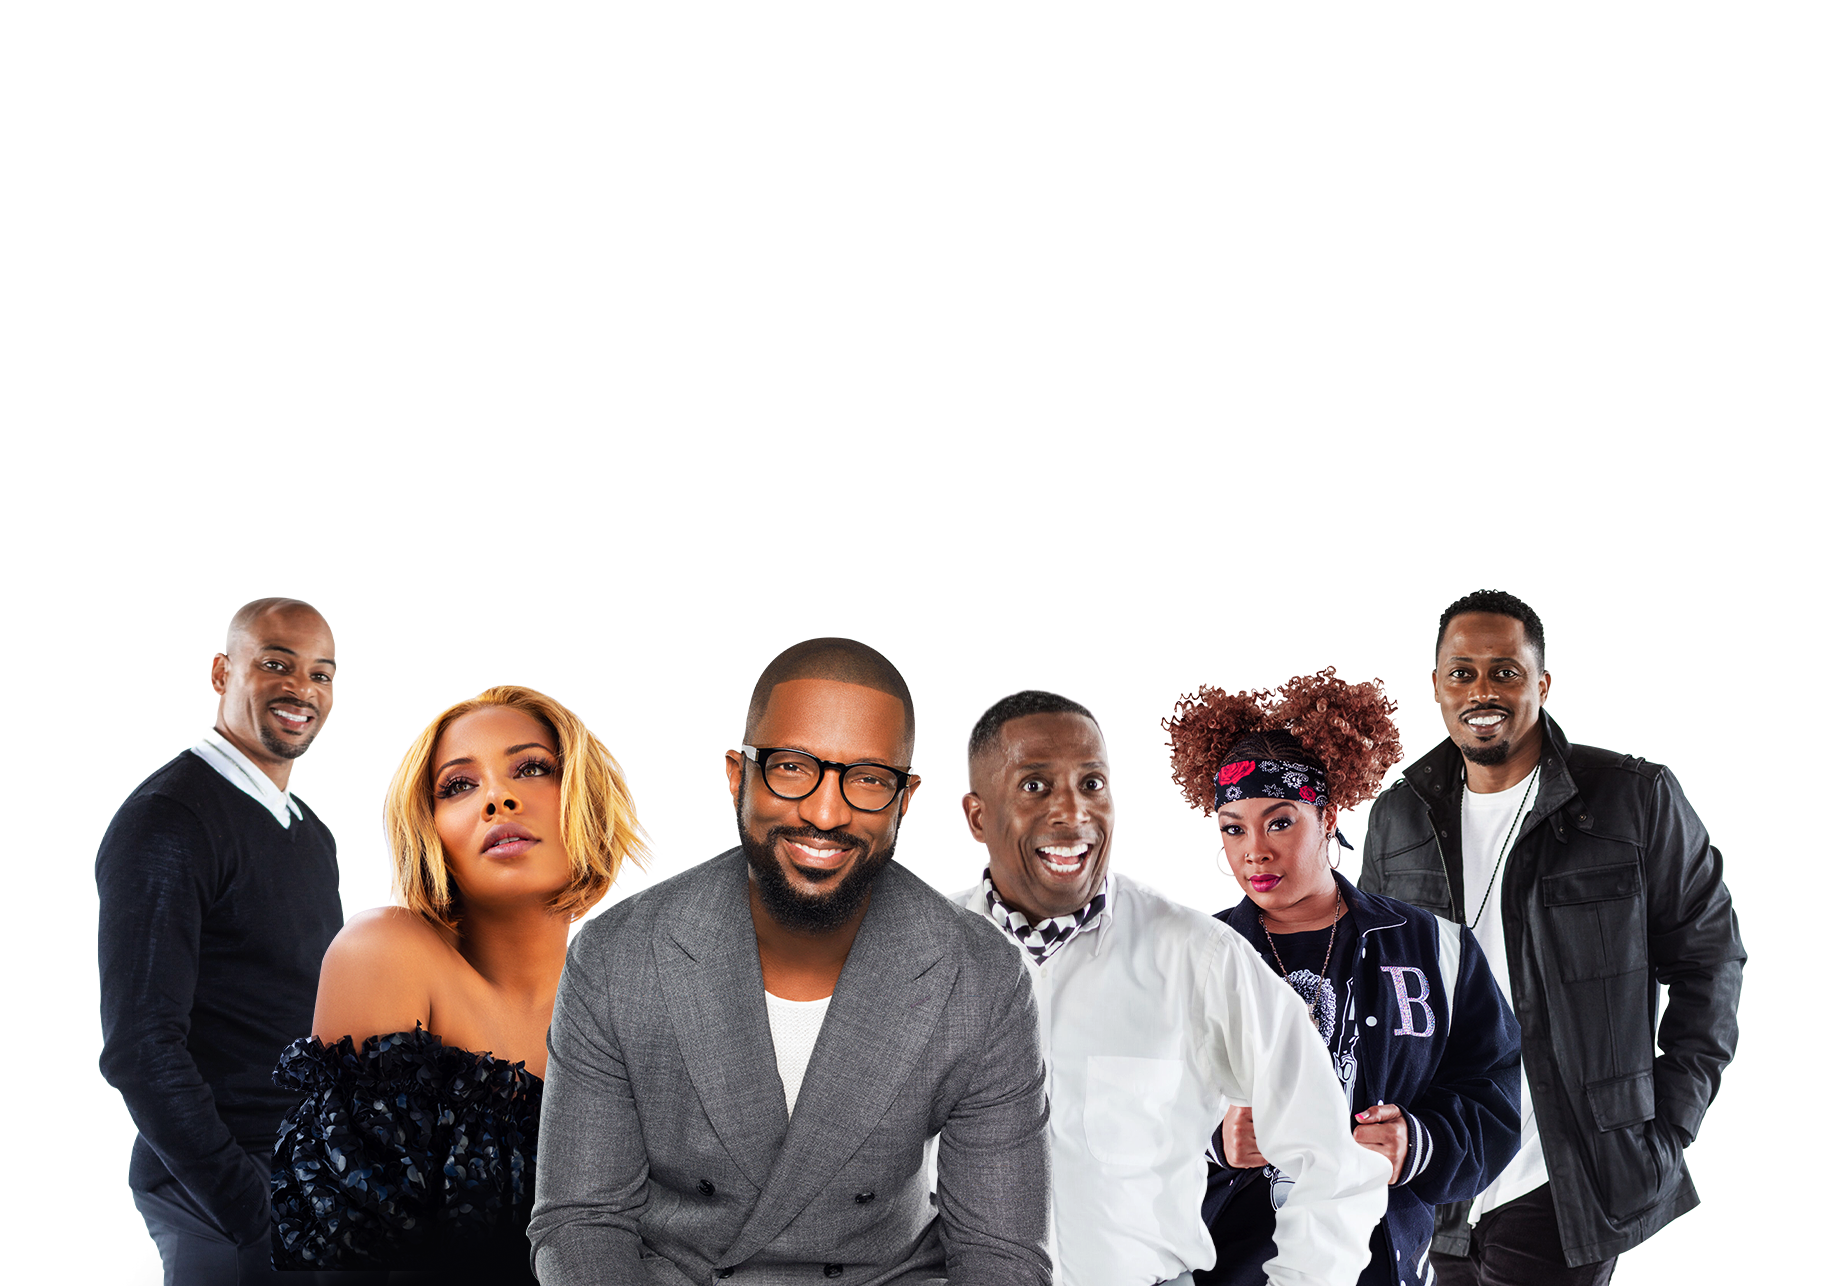 THE RICKEY SMILEY MORNING SHOW